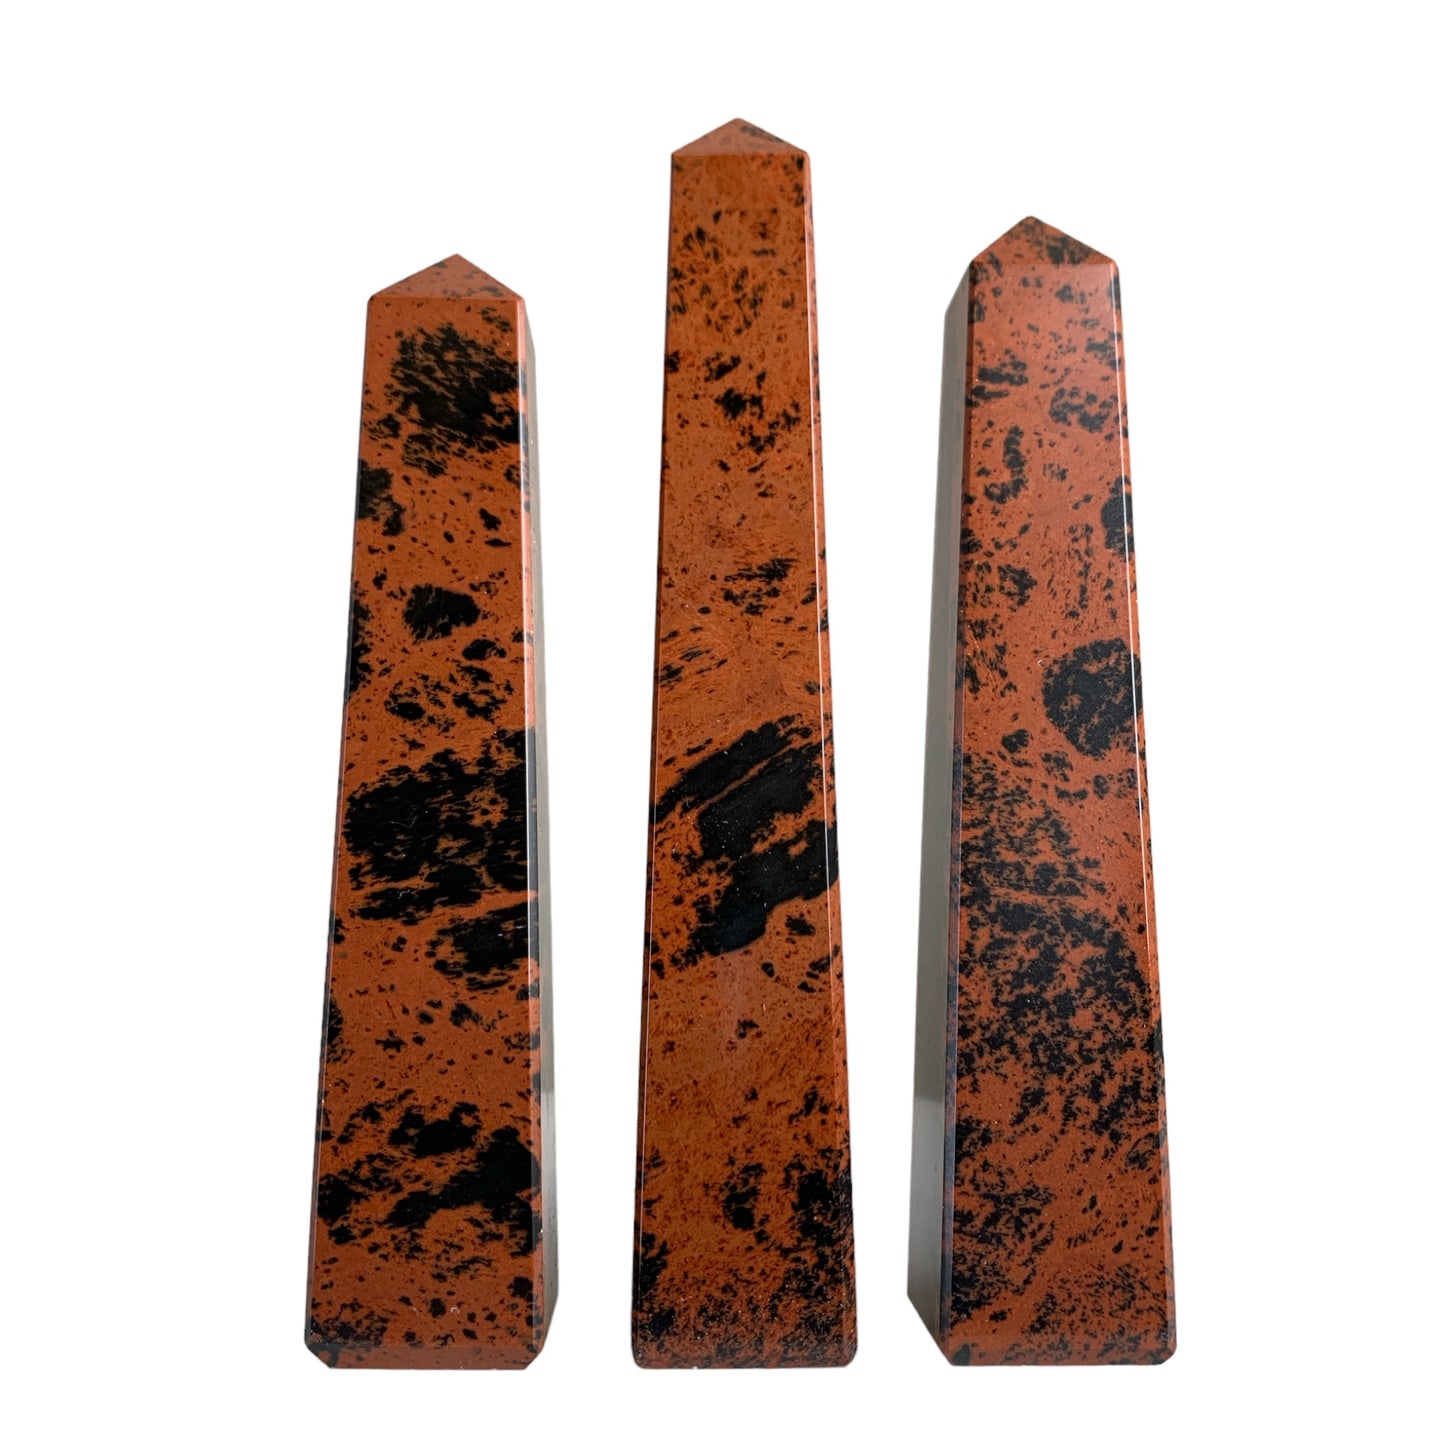 Mahogany Obsidian - 2.5 to 5 inches - Price per gram per piece (B2B ordering 1 = 1 Tower so we charge Ex. 60g = $6.00 each) - Polished Towers Points